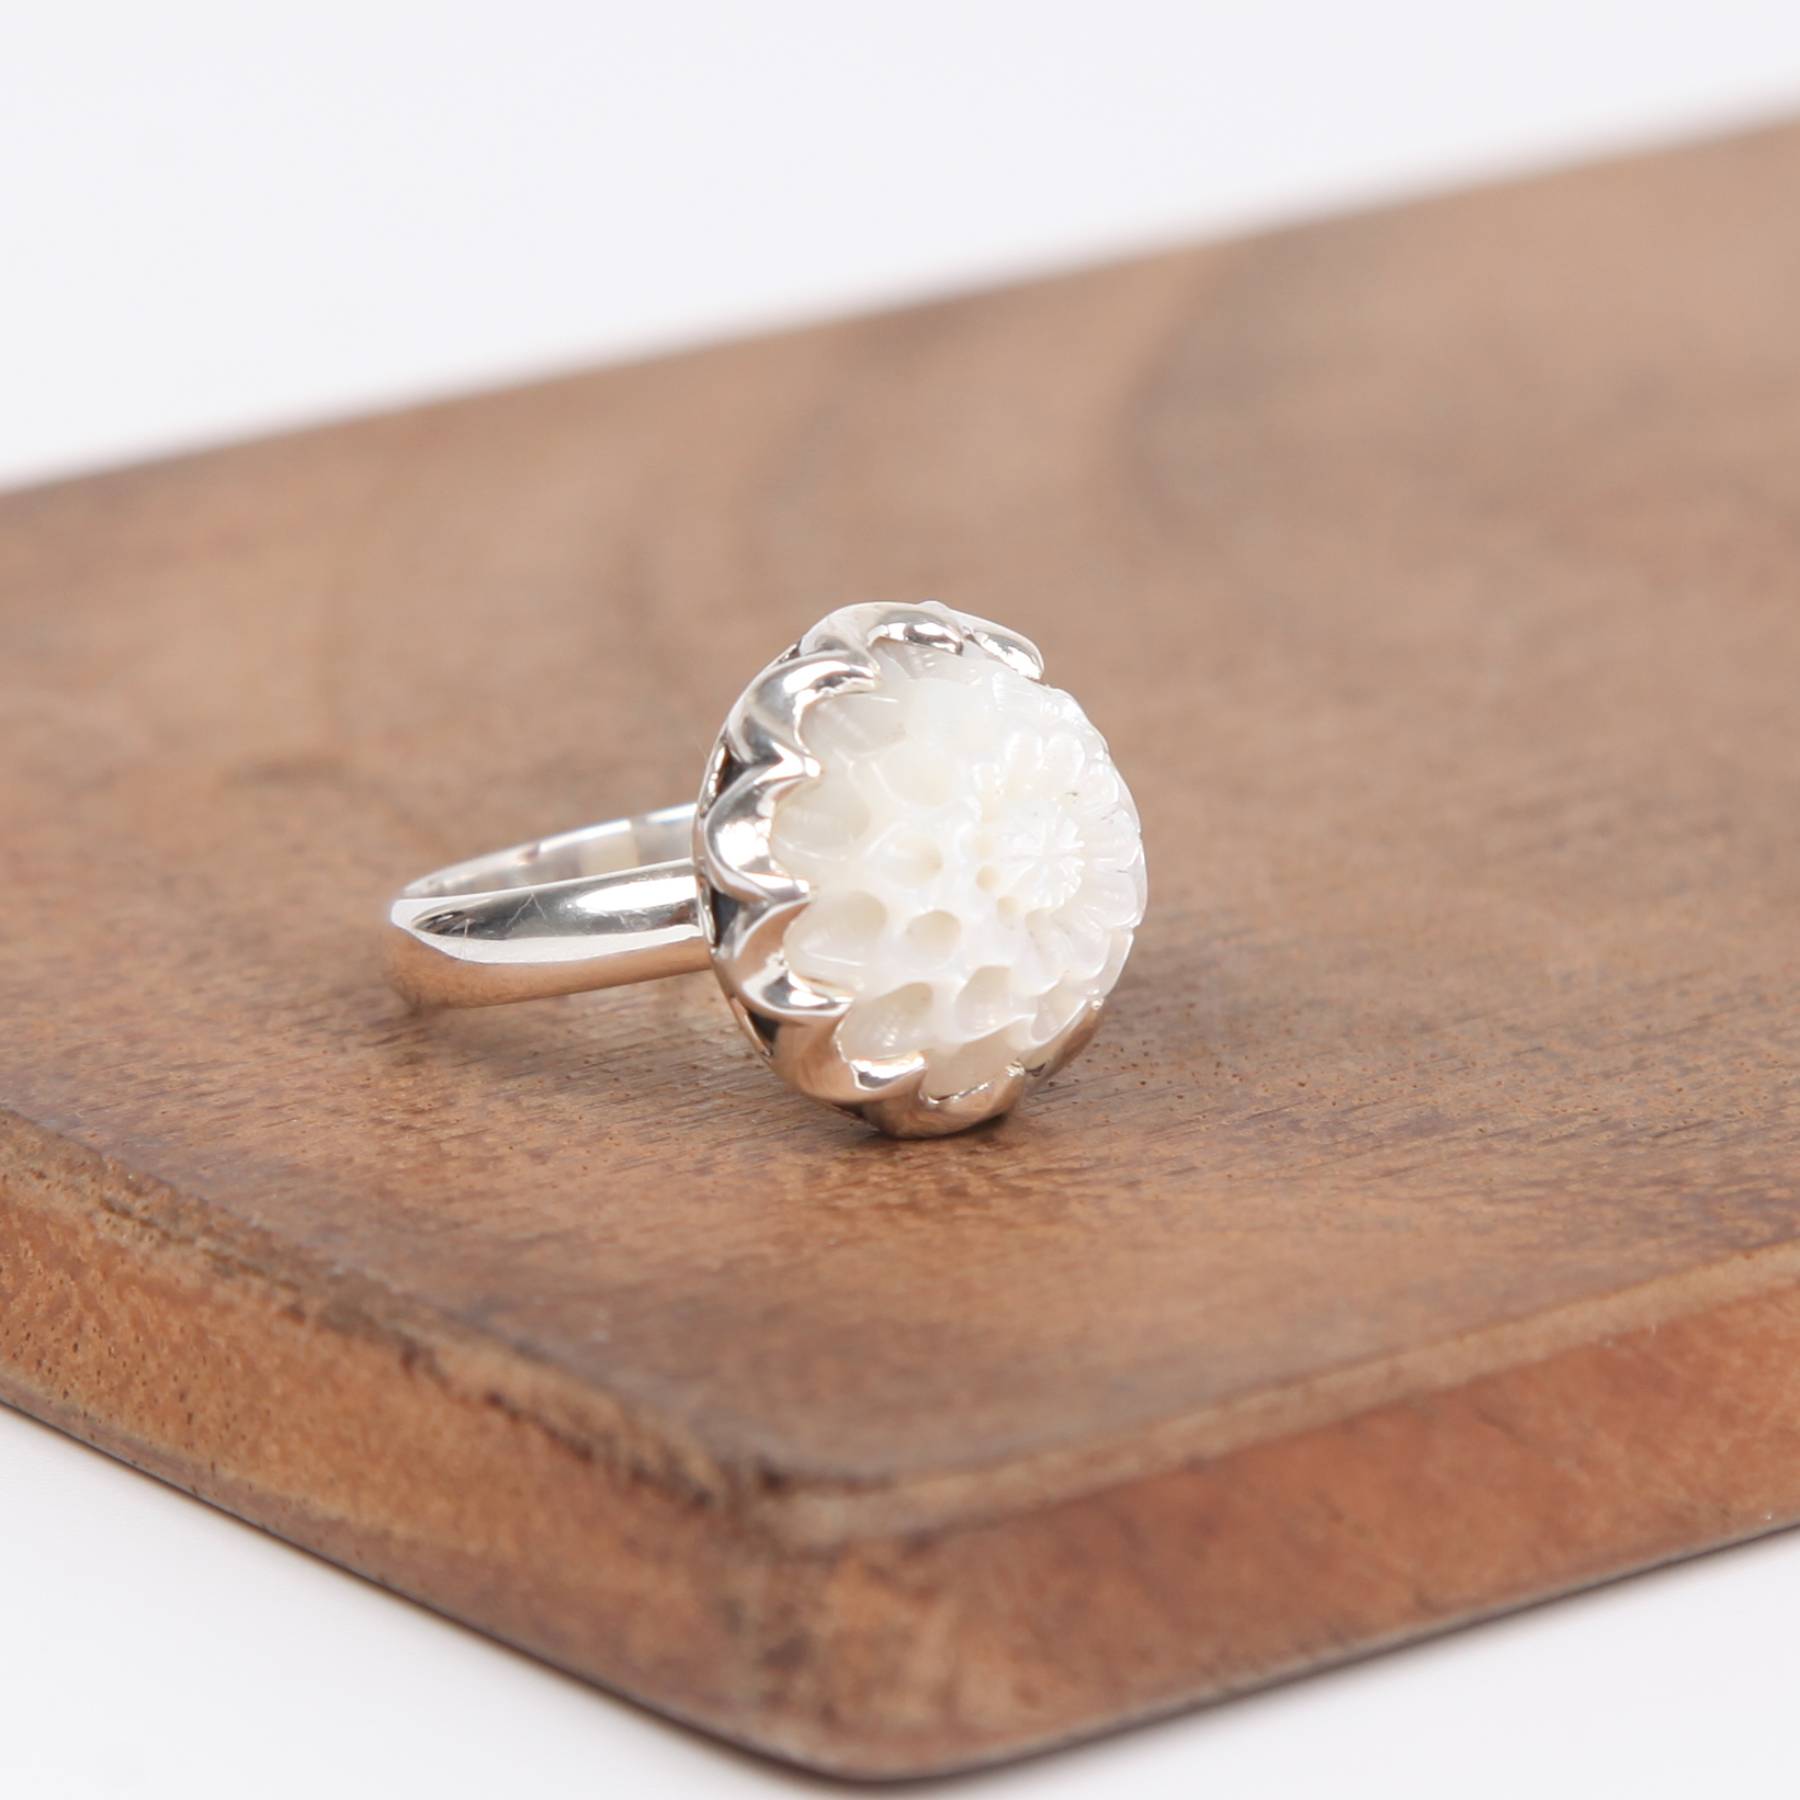 Floral Sterling Silver Ring with Mother of Pearl